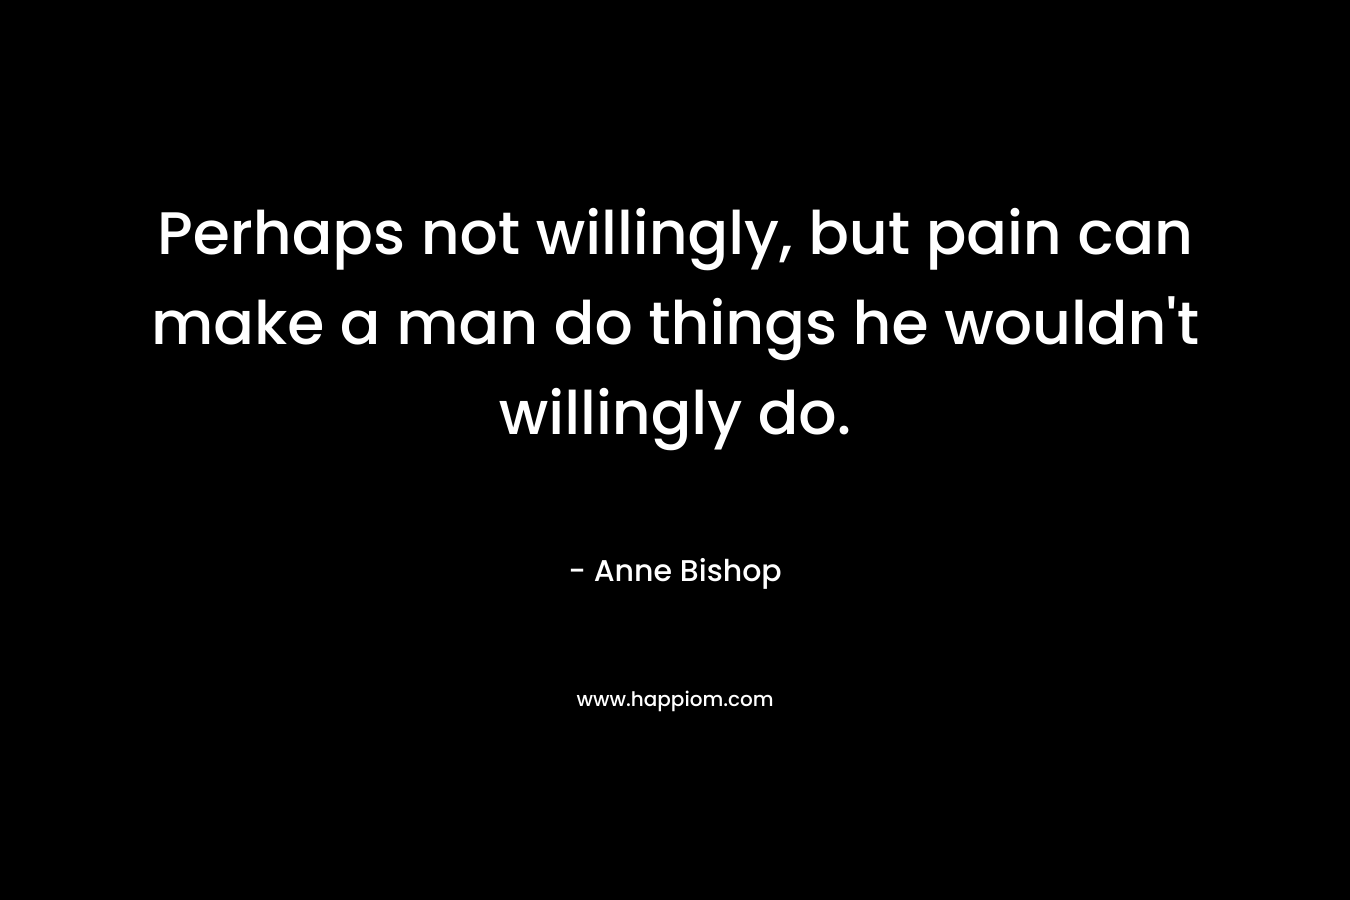 Perhaps not willingly, but pain can make a man do things he wouldn't willingly do.